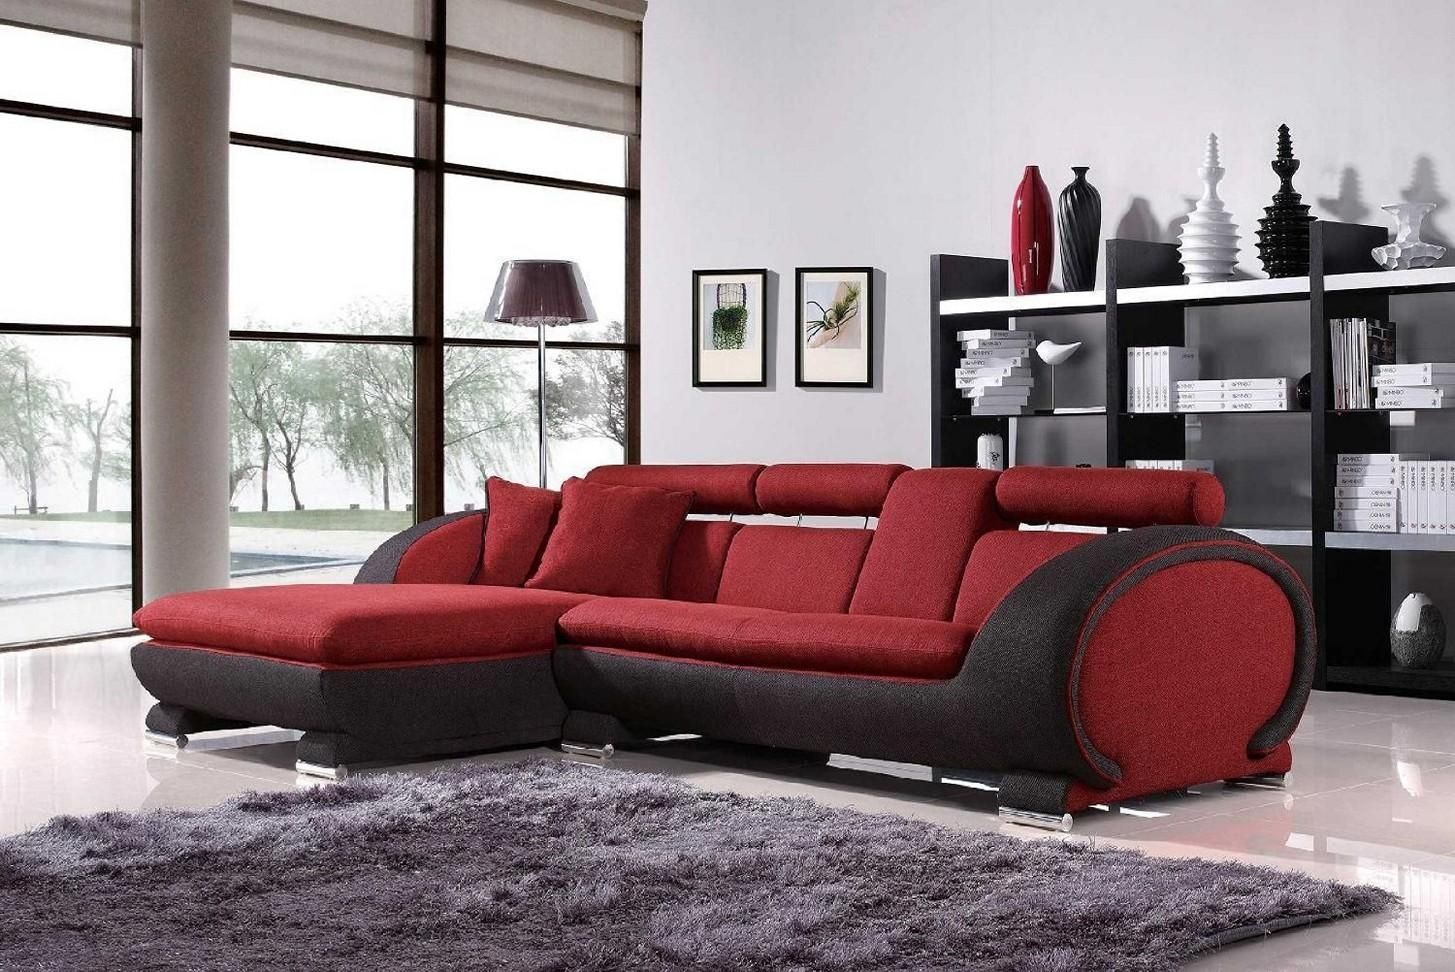 Sofas Center : Cheap Modern Sectional Sofas Unique Images With Regard To Sofas Cheap Prices (View 9 of 20)